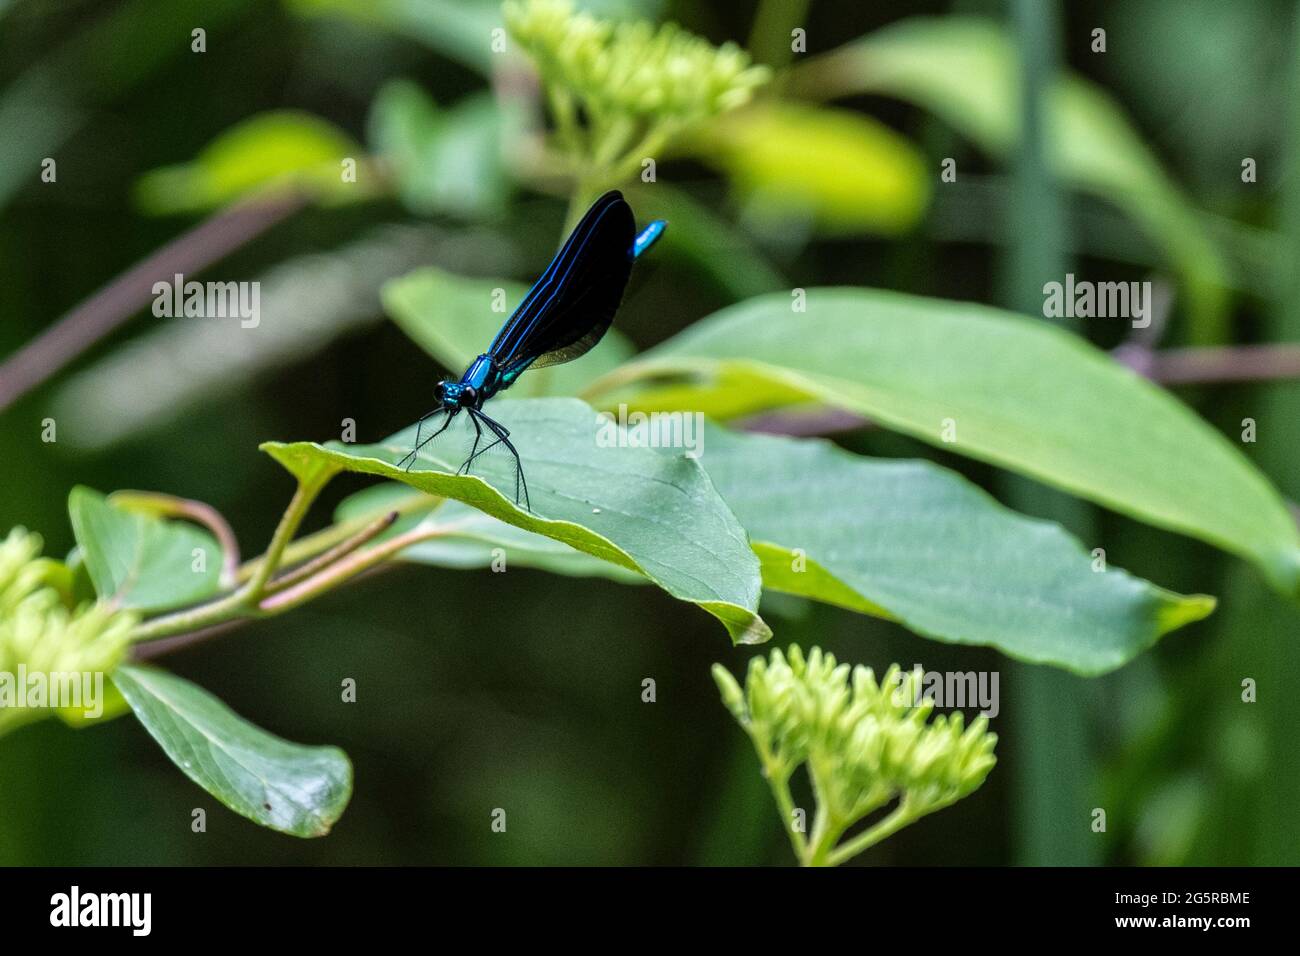 Close up of ebony jeweling insect on a leaf Stock Photo